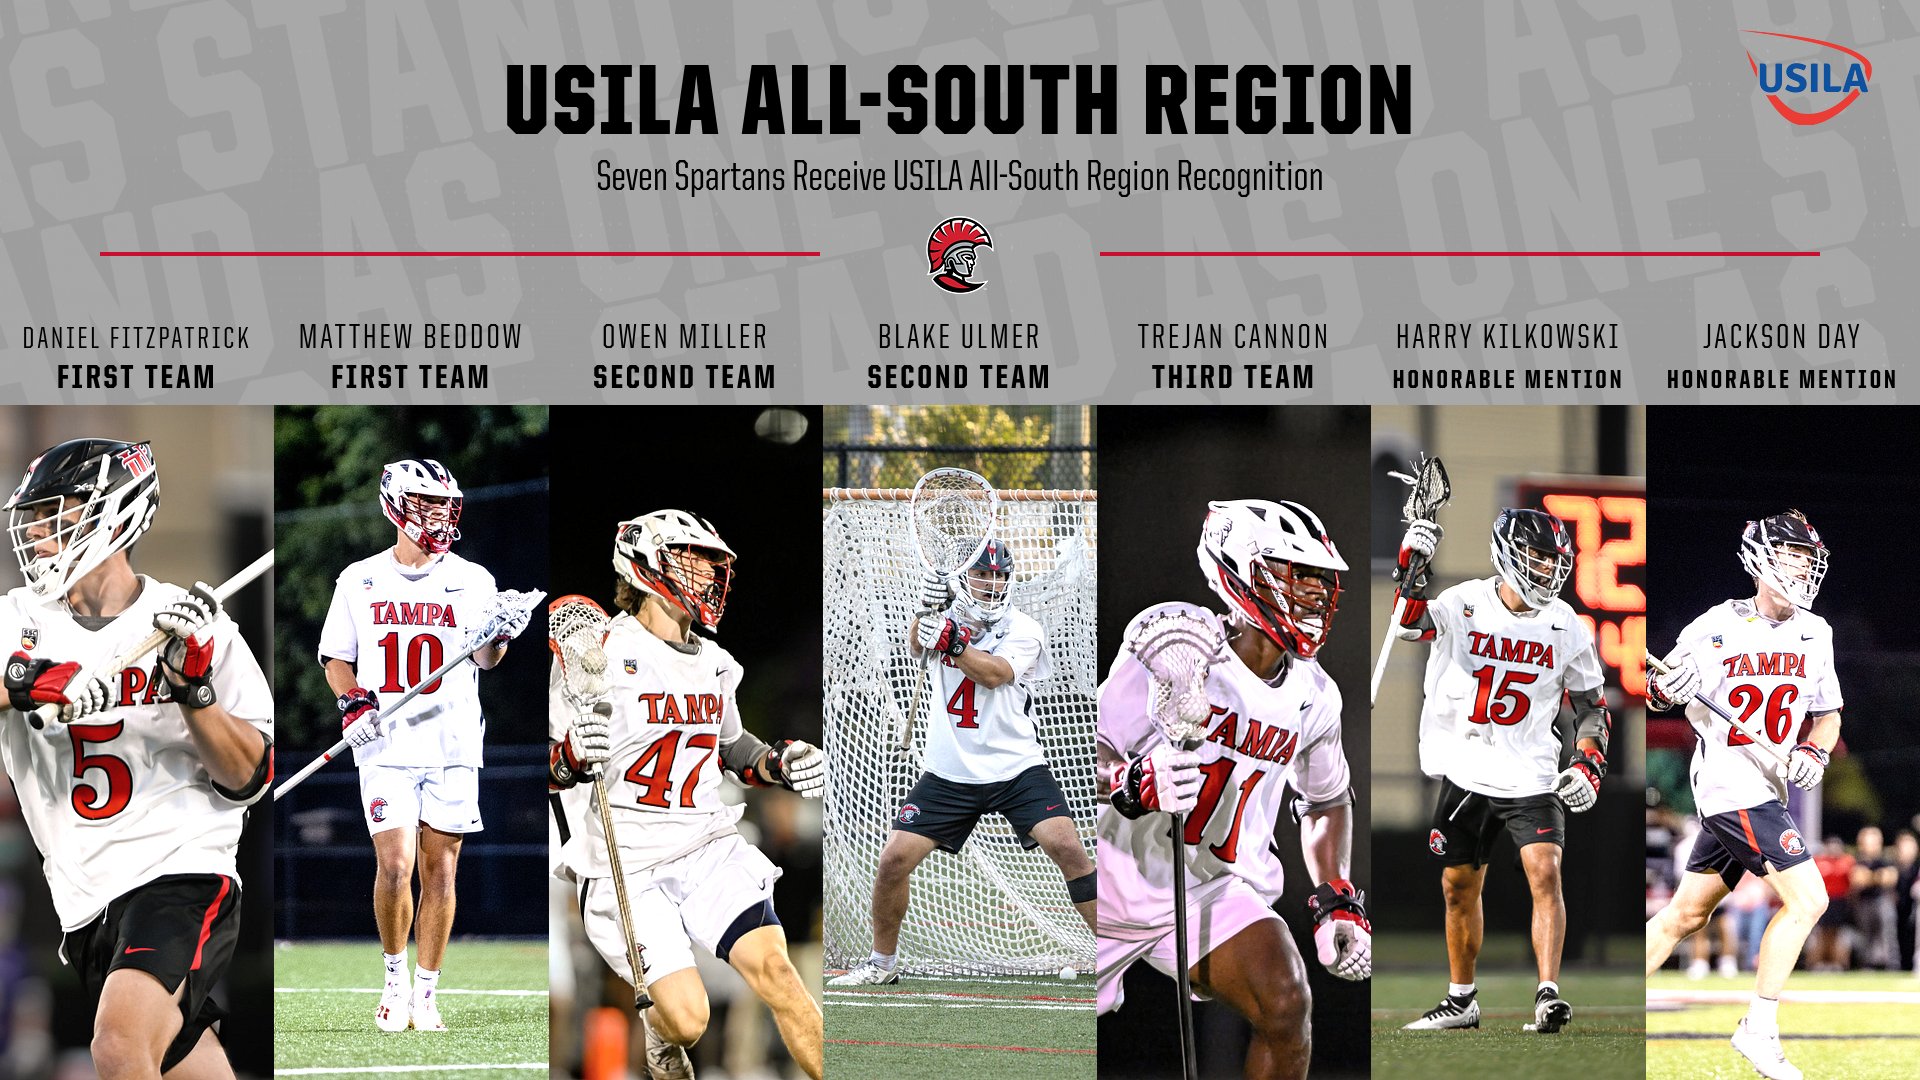 USILA All-South Region Awards Announced, Seven Spartans Selected